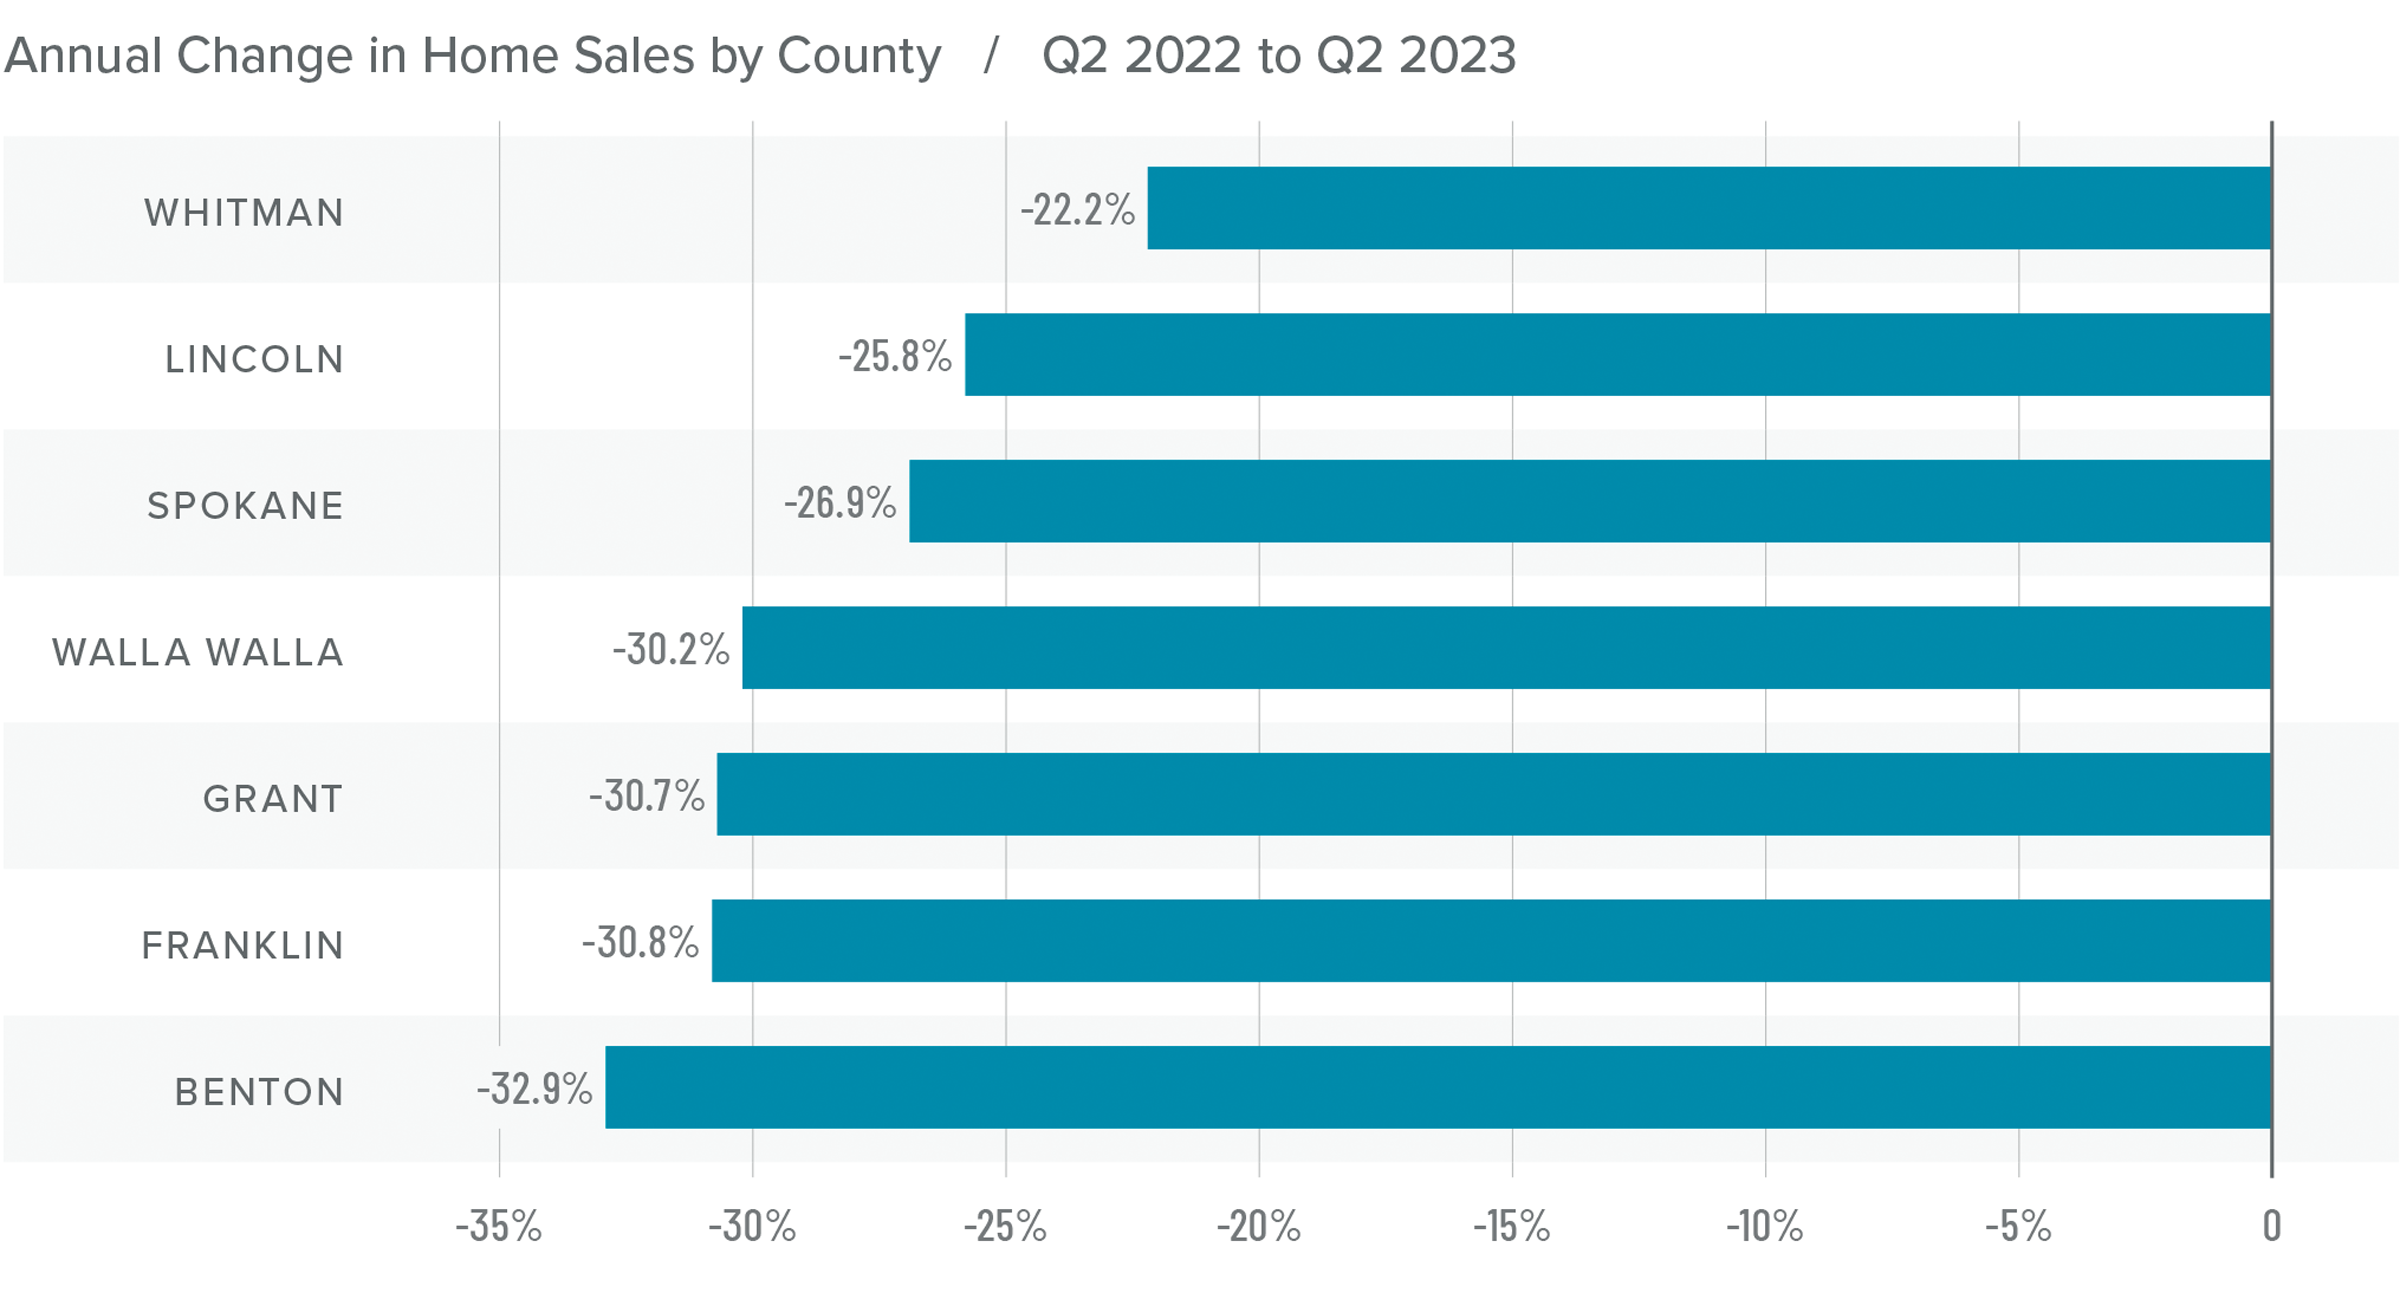 A graph showing the annual change in home sales by county for Eastern Washington from Q2 2022 to Q2 2023. Whitman had the least drastic change at -22.2%, while Benton had the largest change at -32.9%. Counties like Spokane and Walla Walla were in the middle at around -30%.